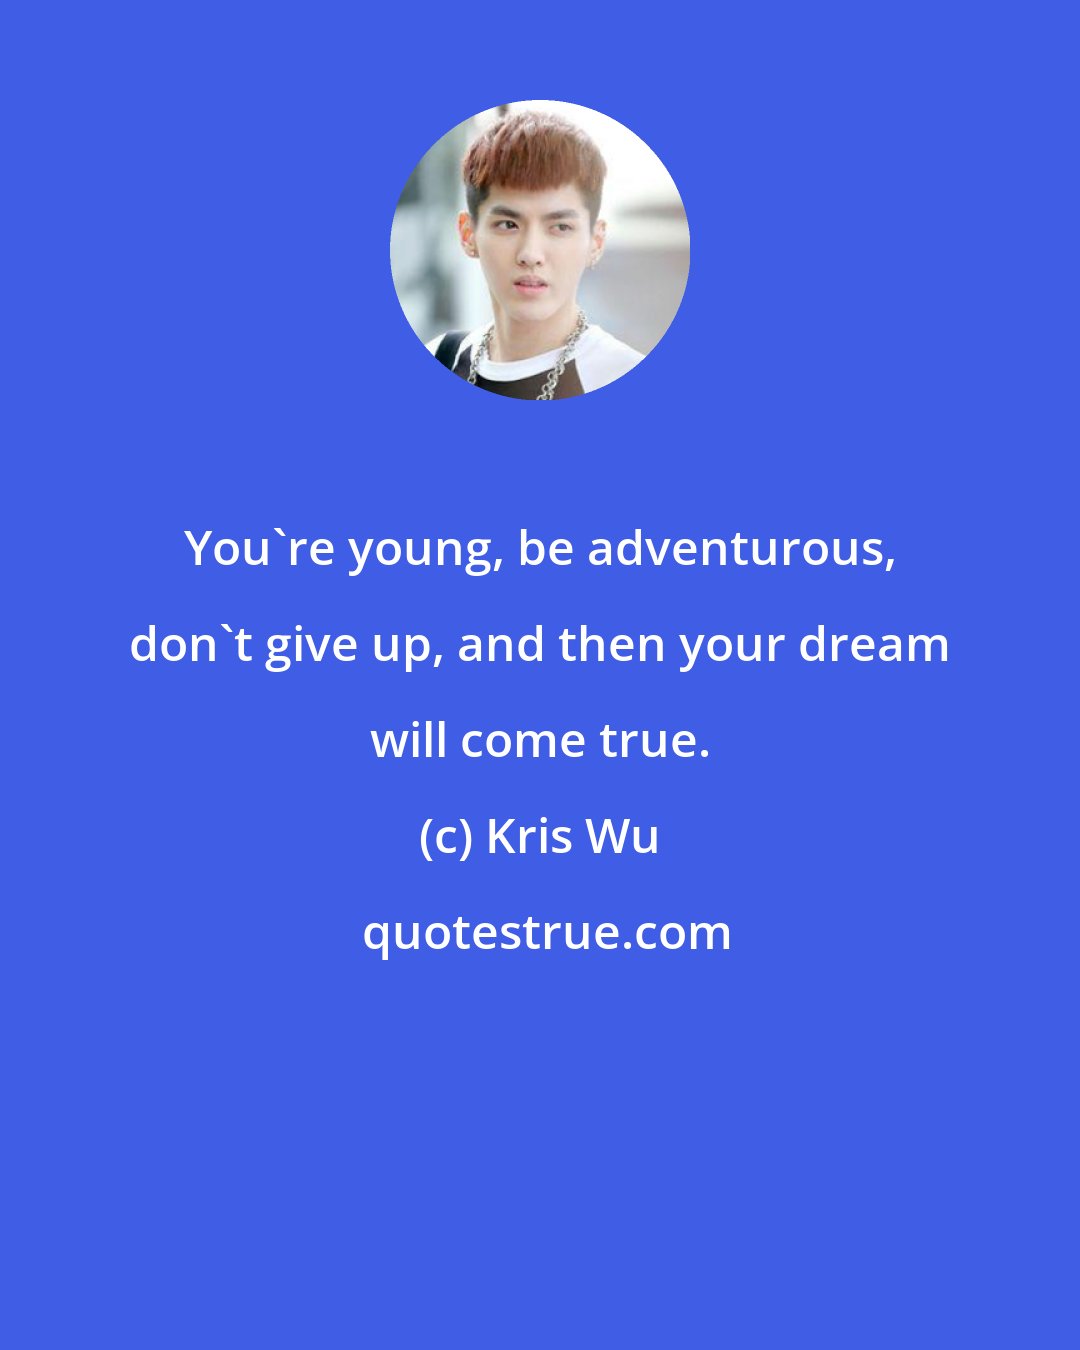 Kris Wu: You're young, be adventurous, don't give up, and then your dream will come true.